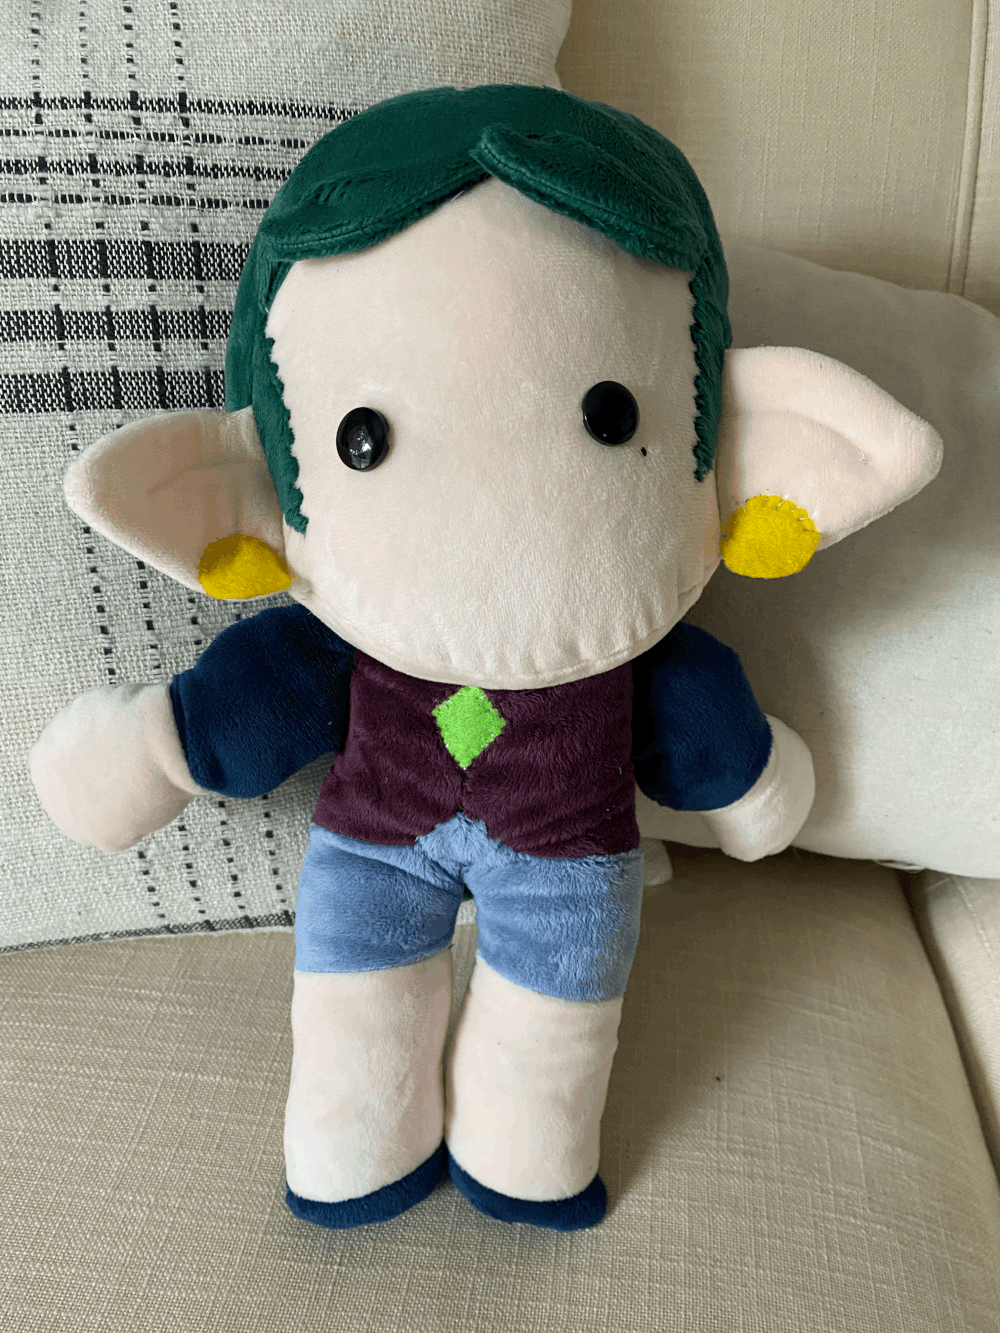 Amity Blight Plush from The Owl House 